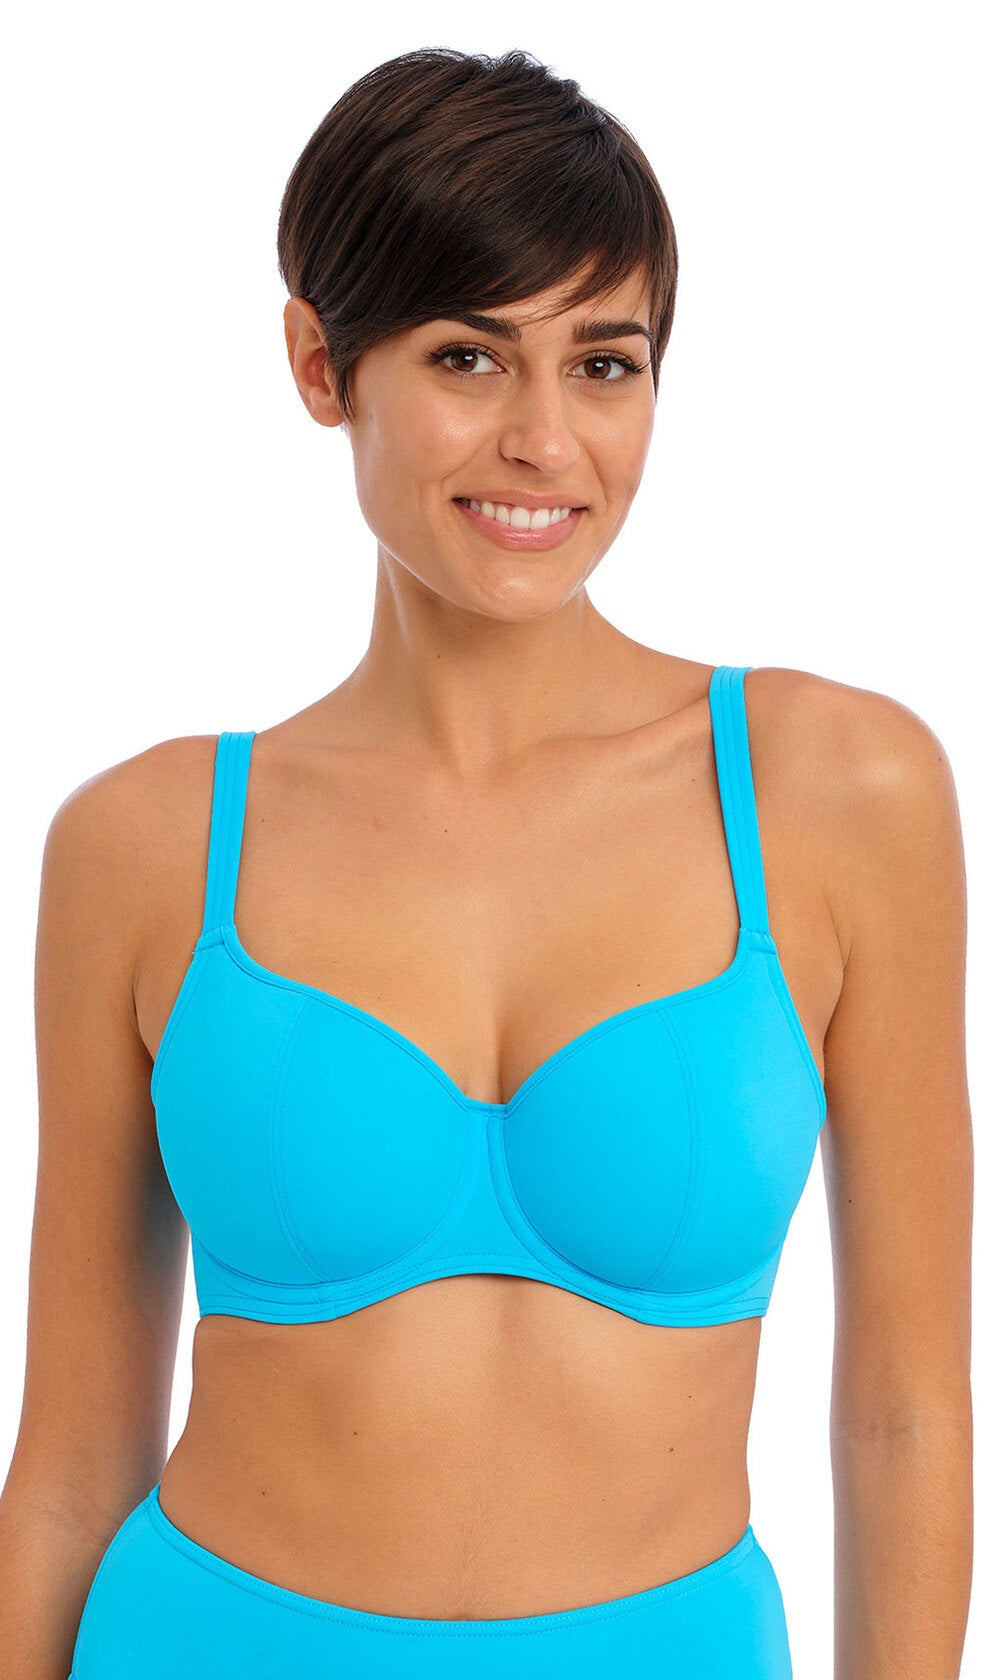 Jewel Cove Plain Turquoise UW Sweetheart Bikini Top, Special Order D Cup to HH Cup